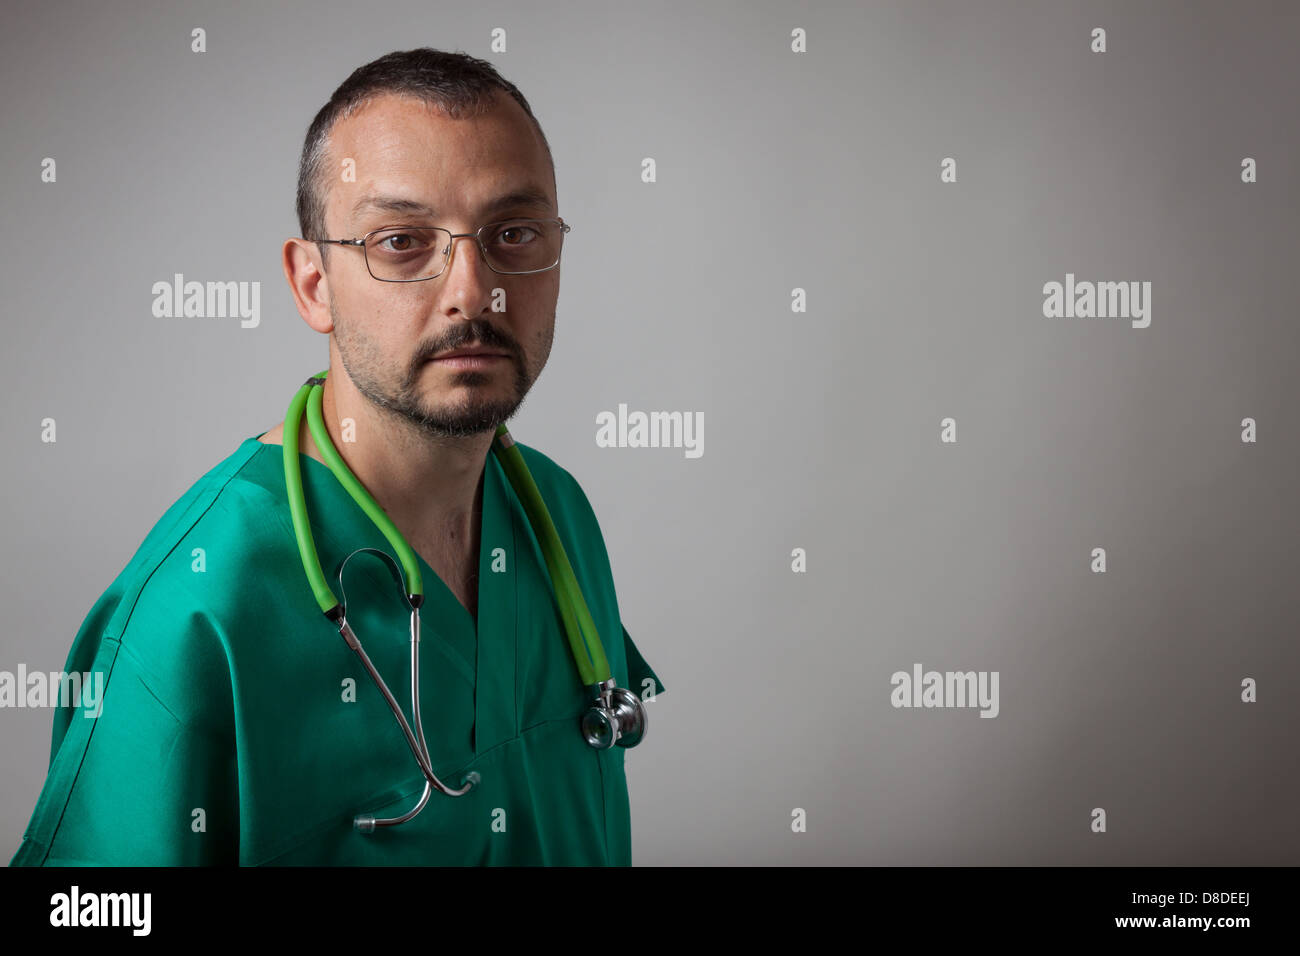 Portrait of a young physician with green uniform Stock Photo